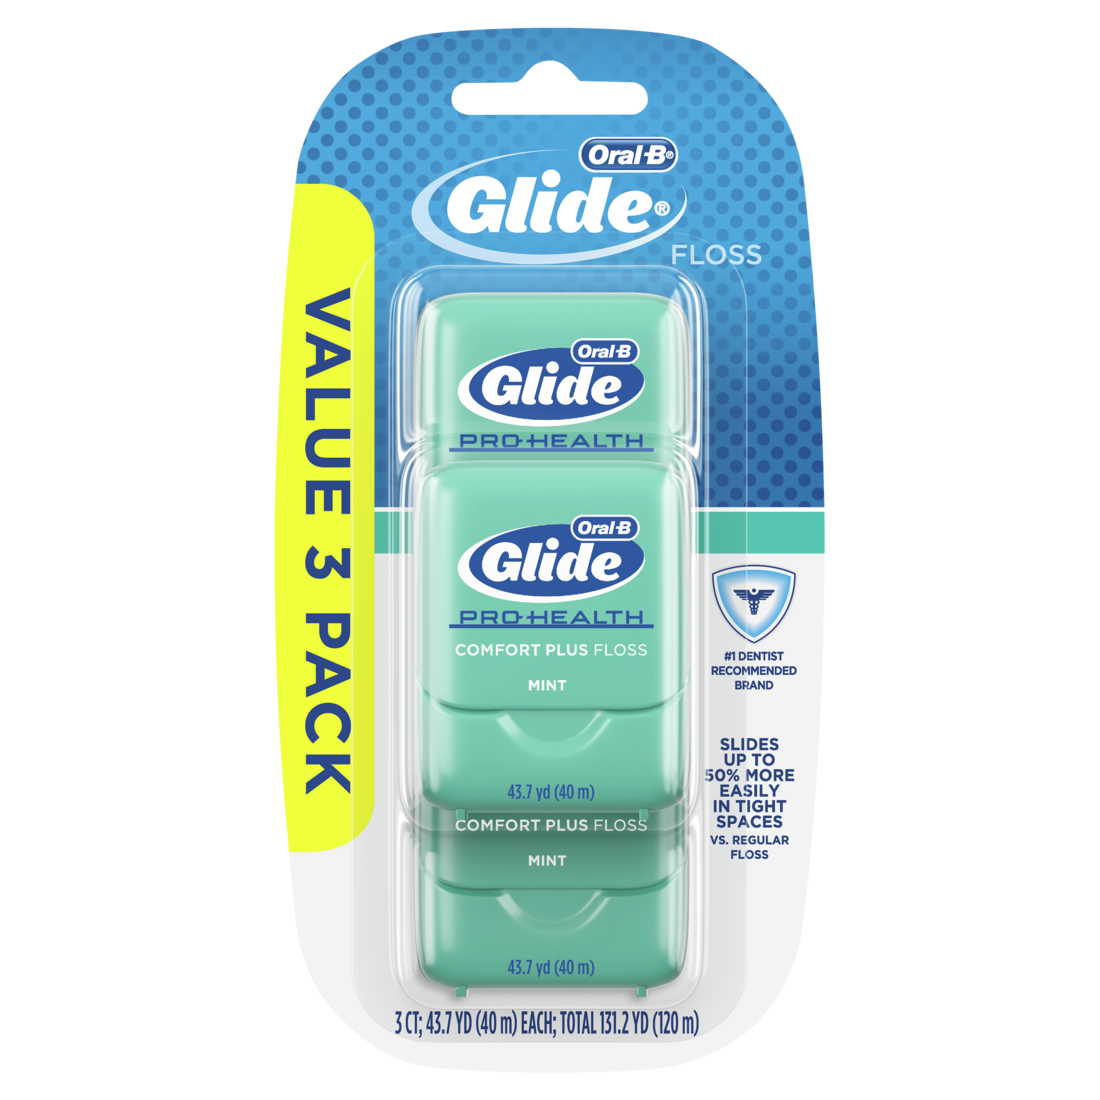 Oral-B Glide Pro-Health Comfort Plus Dental Floss, Extra Soft Value 3 Pack - 40m each x 3/16pk